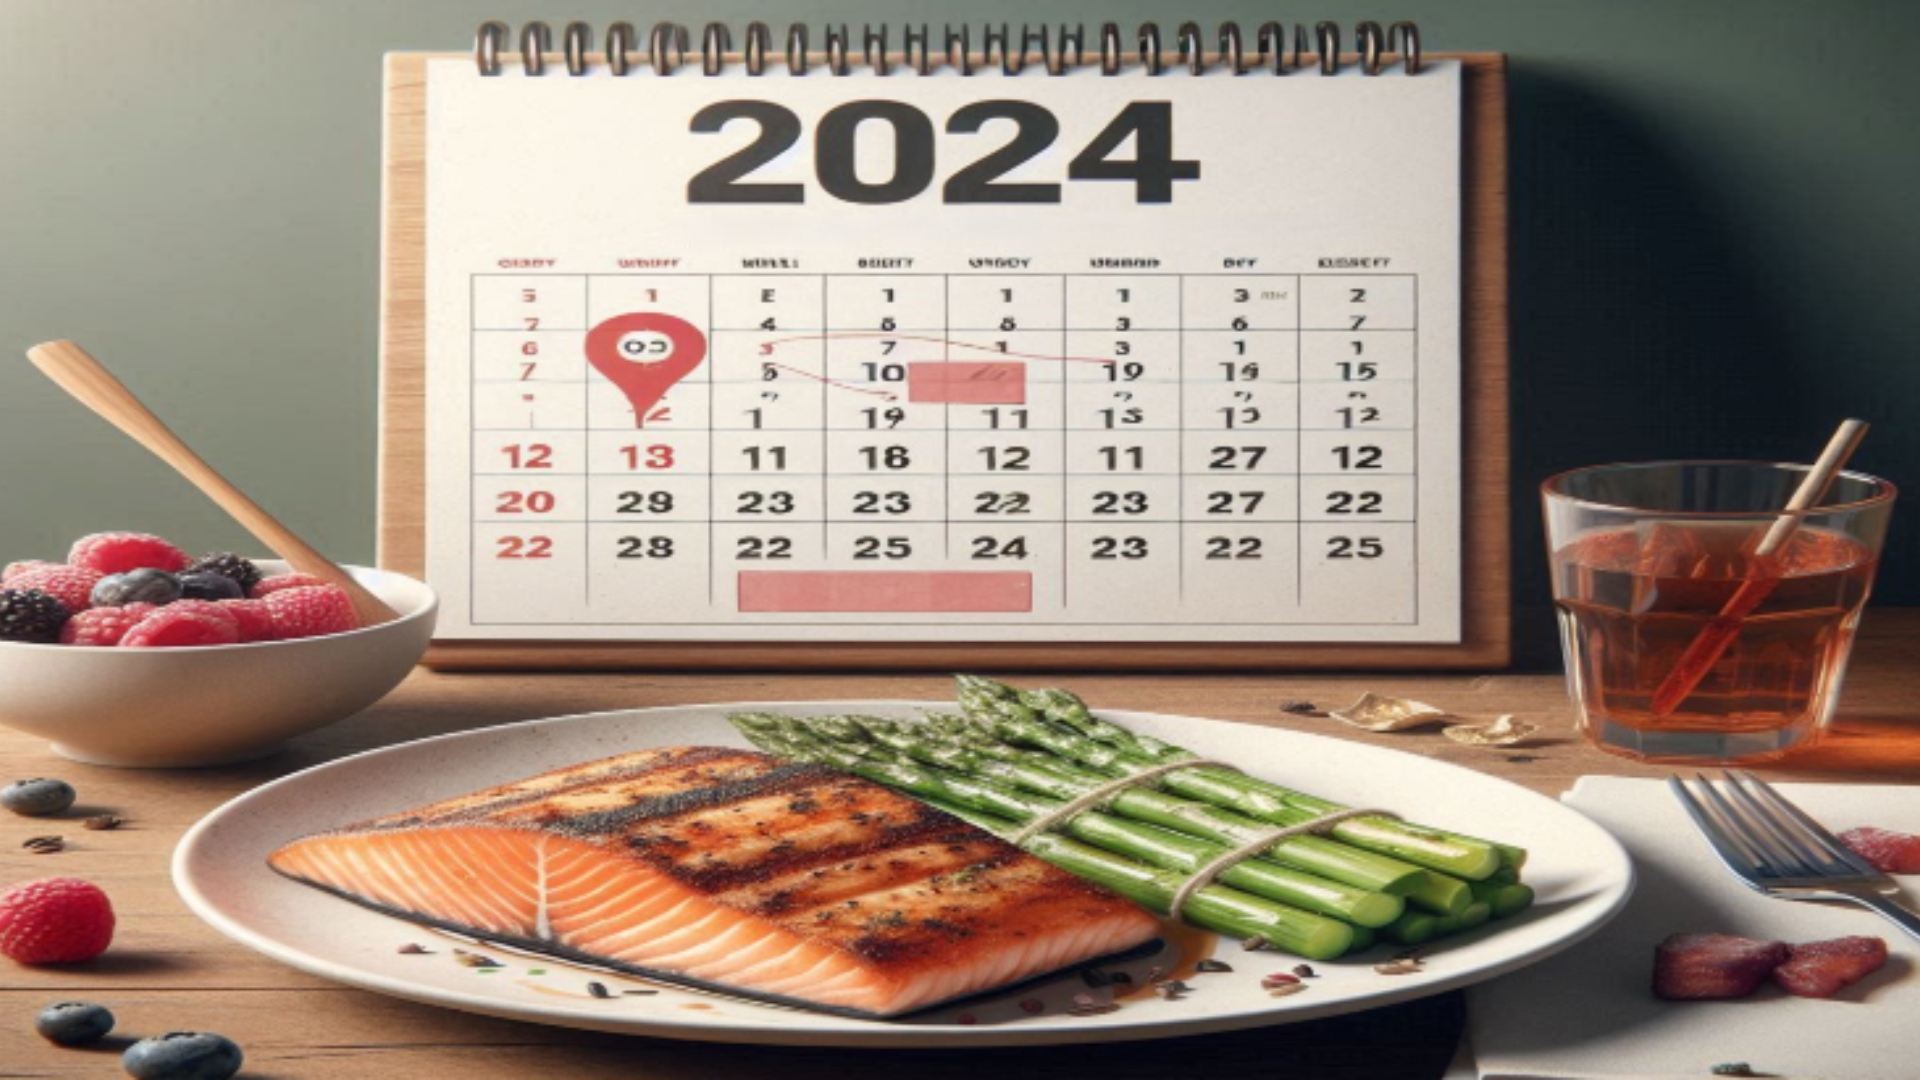 Keto Diet in 2024: Benefits, Risks & Latest Trends. Learn about fat burning, blood sugar, weight loss, and if it's right for you.